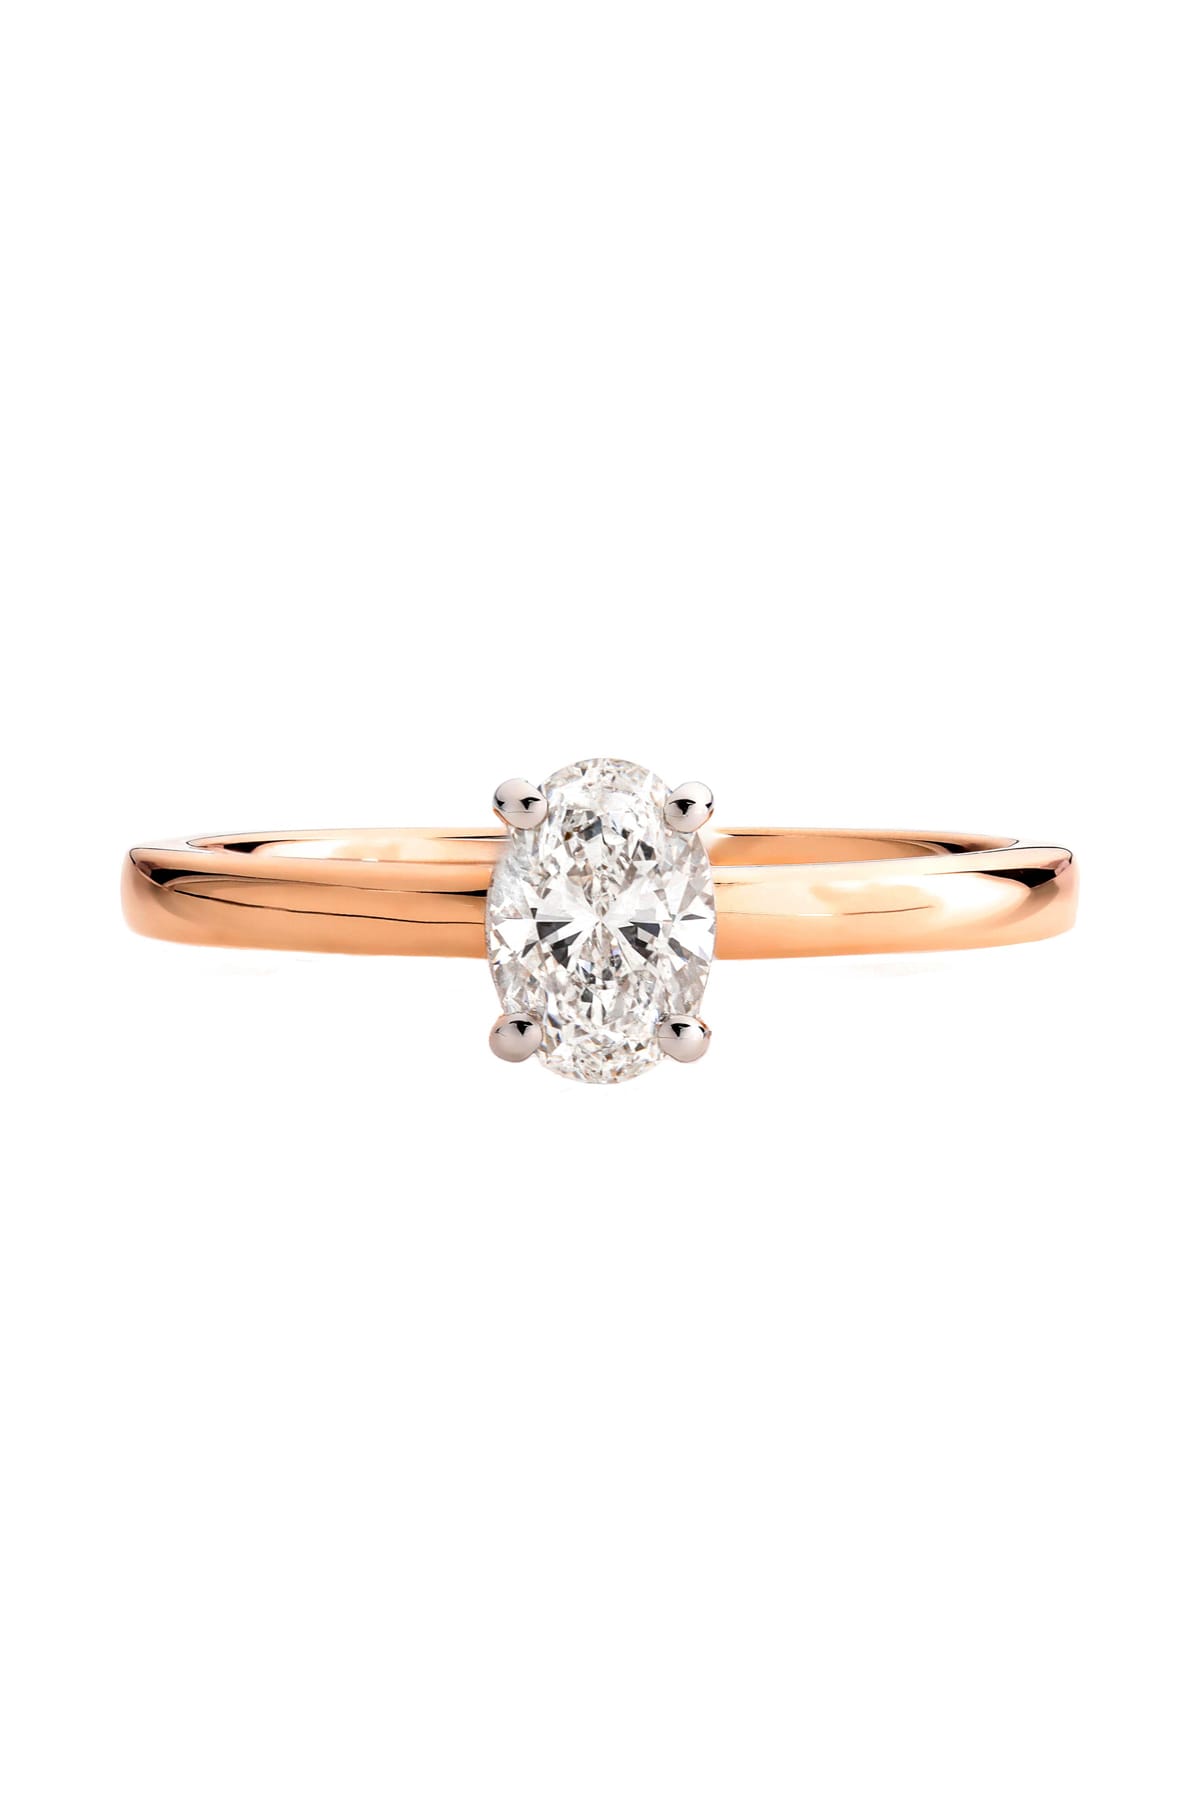 18 Carat Gold 0.71ct Oval Diamond Engagement Ring in rose gold available at LeGassick Diamonds and Jewellery Gold Coast, Australia.